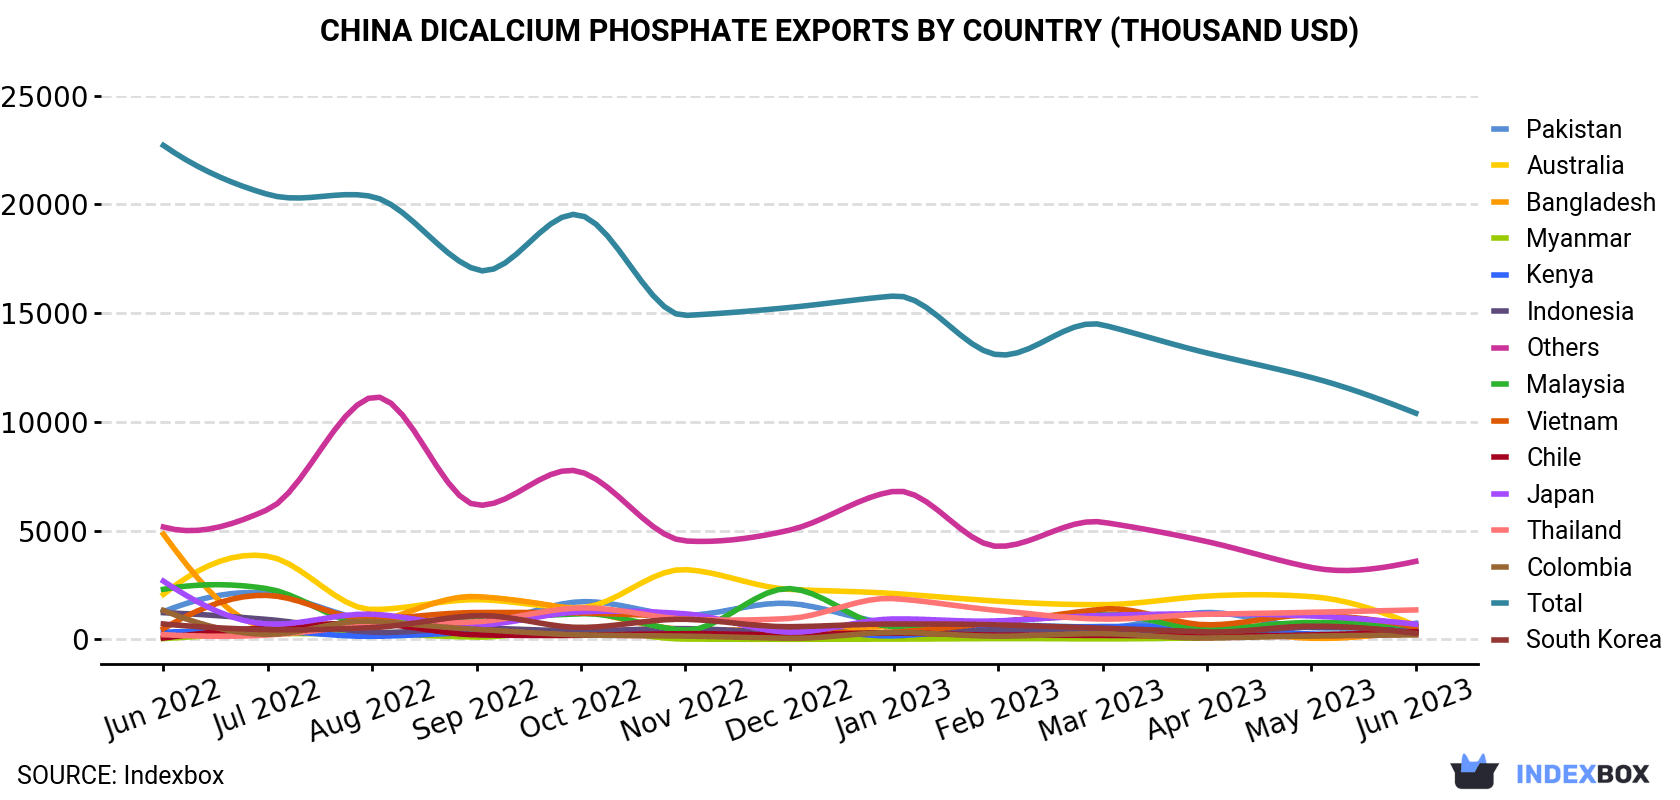 China Dicalcium Phosphate Exports By Country (Thousand USD)